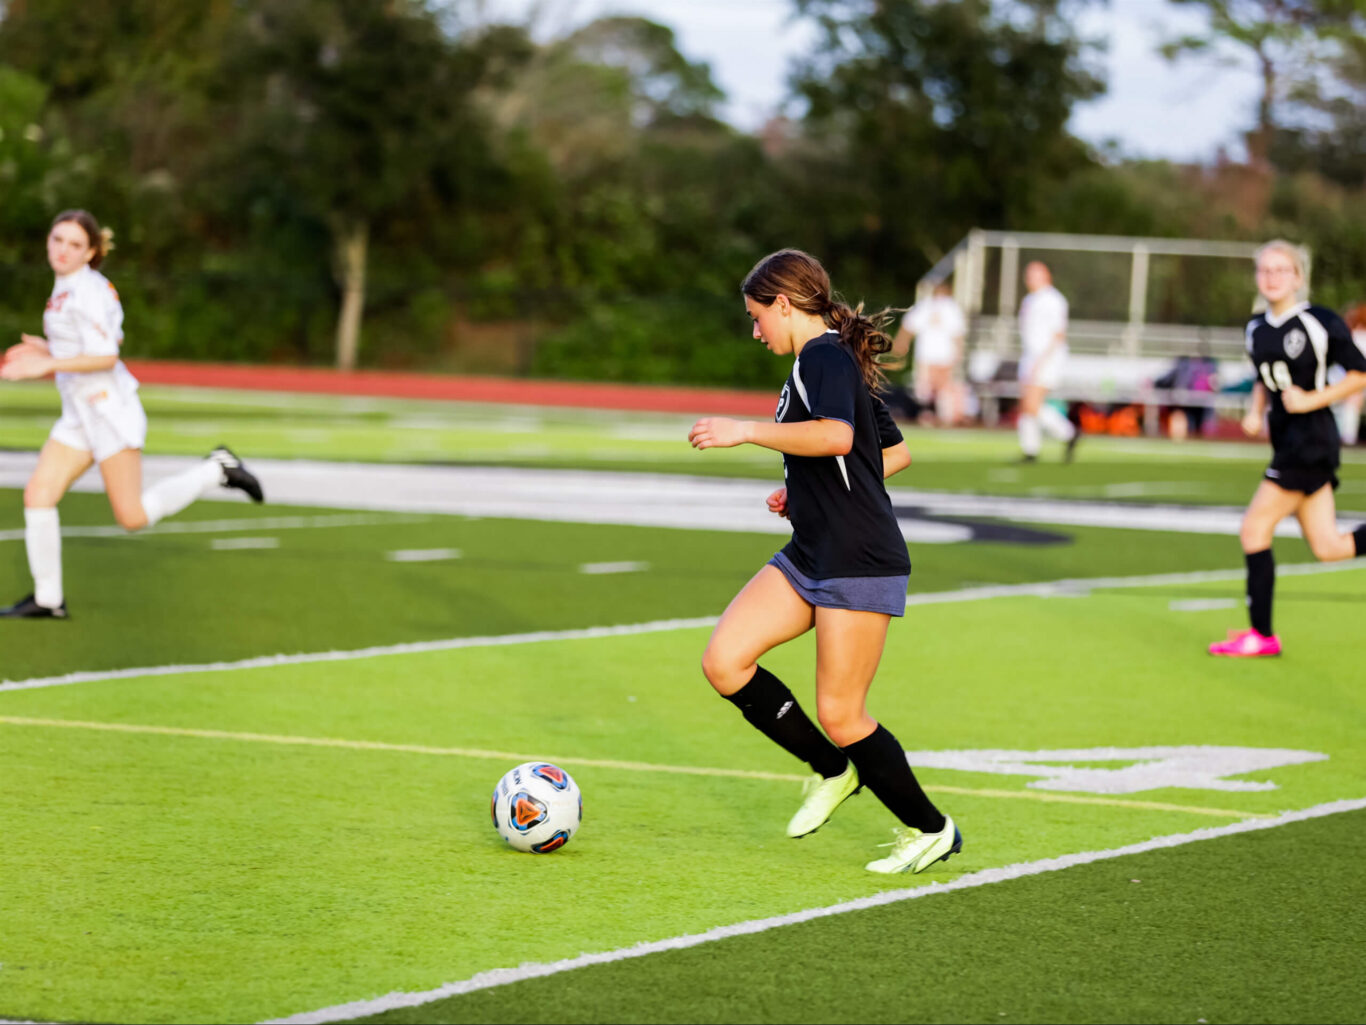 A girl playing soccer on a field.